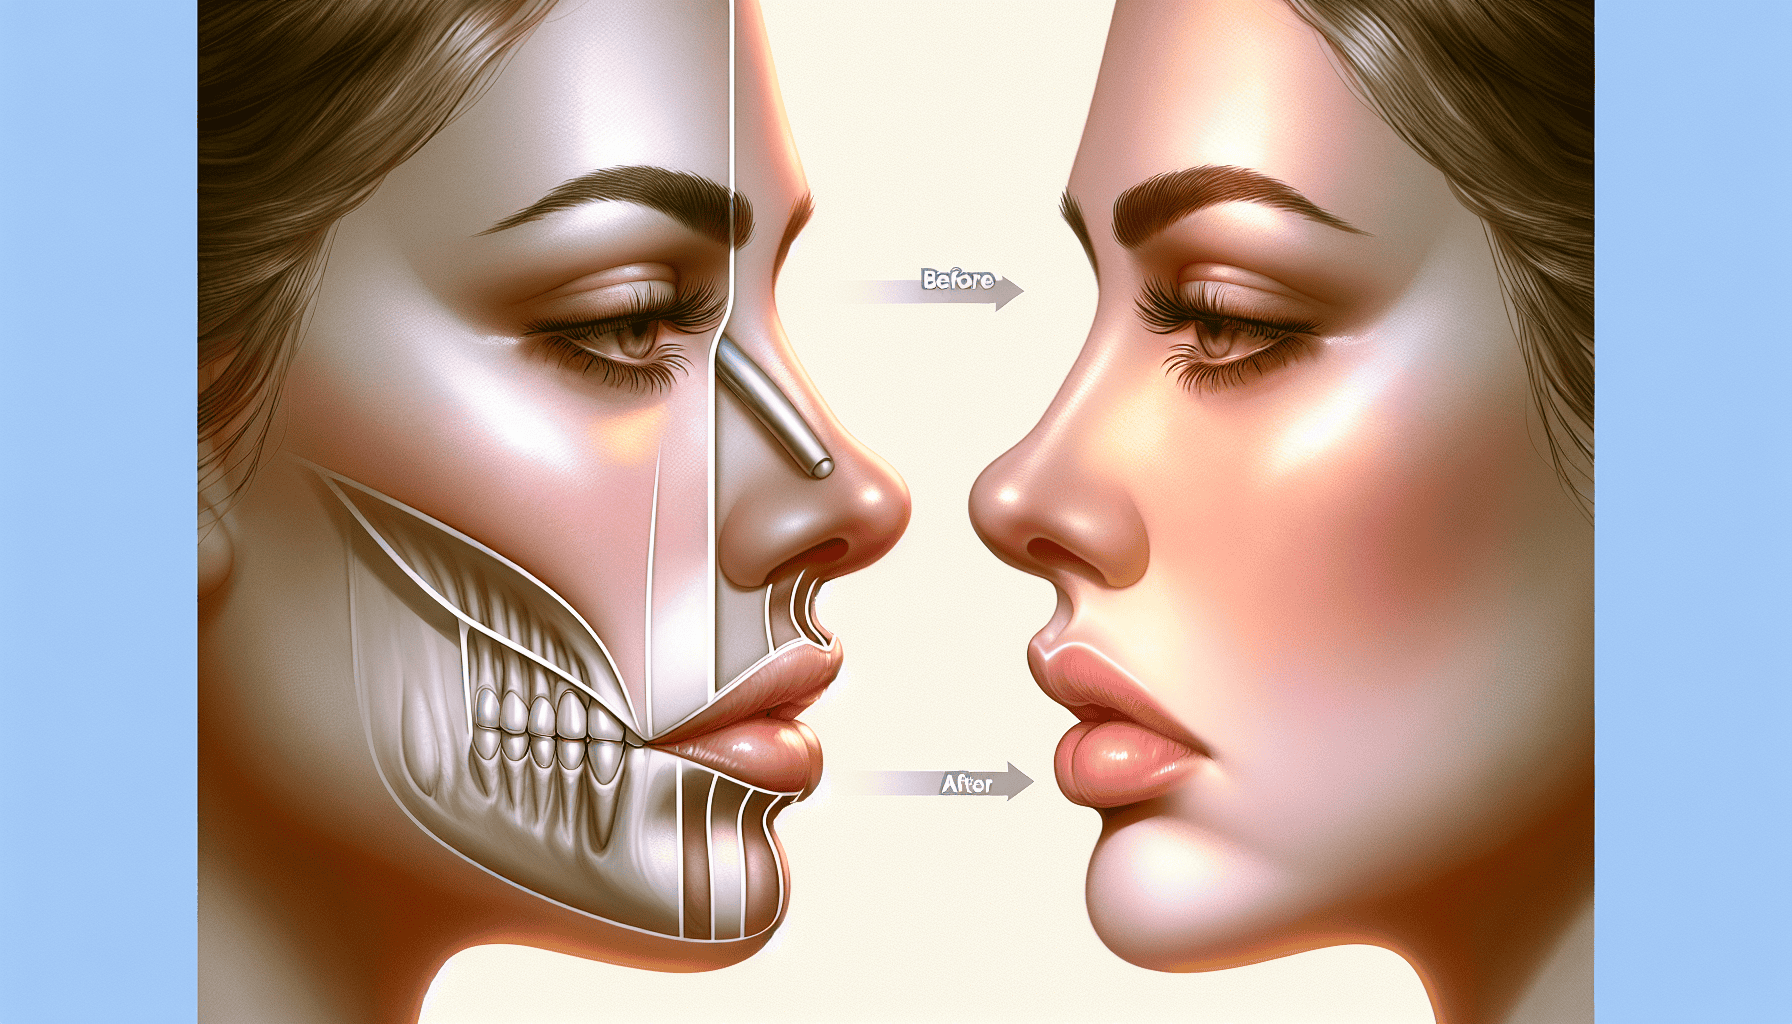 Illustration of facial profile changes after tooth extraction